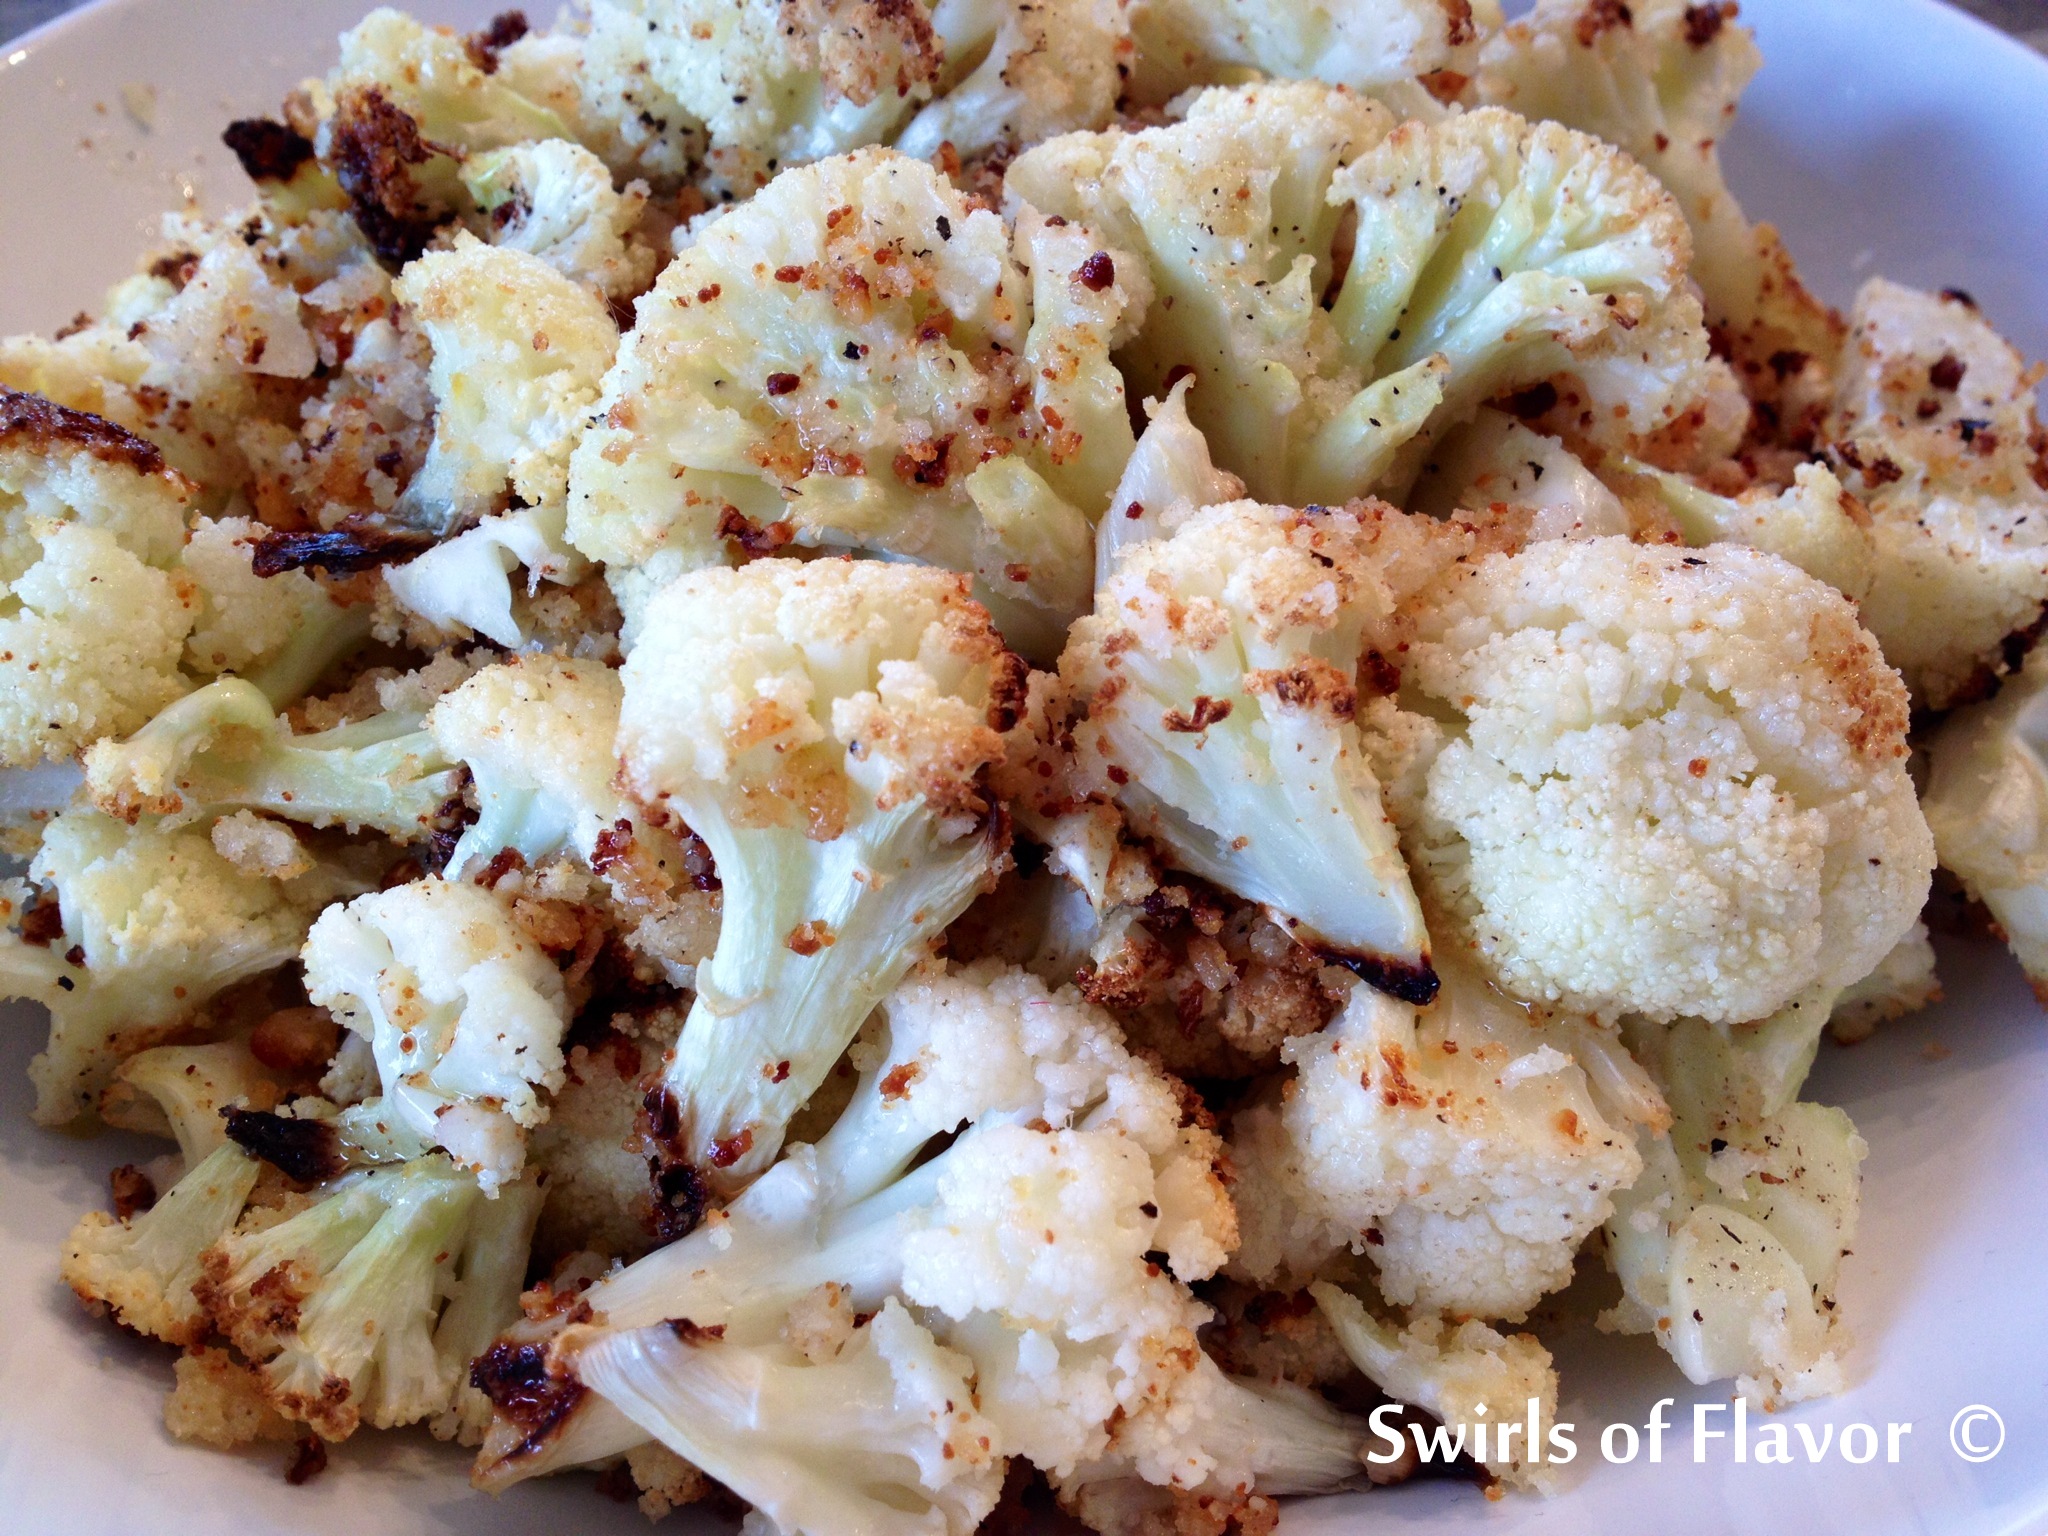 Oven-roasted cauliflower is cooked to perfection with cheesy goodness that melts into all the nooks and crannies. Studded with bits of crispy turkey bacon and scallions, Loaded Baked Cauliflower Casserole really is the healthy alternative to the classic loaded baked potato that you've been looking for!